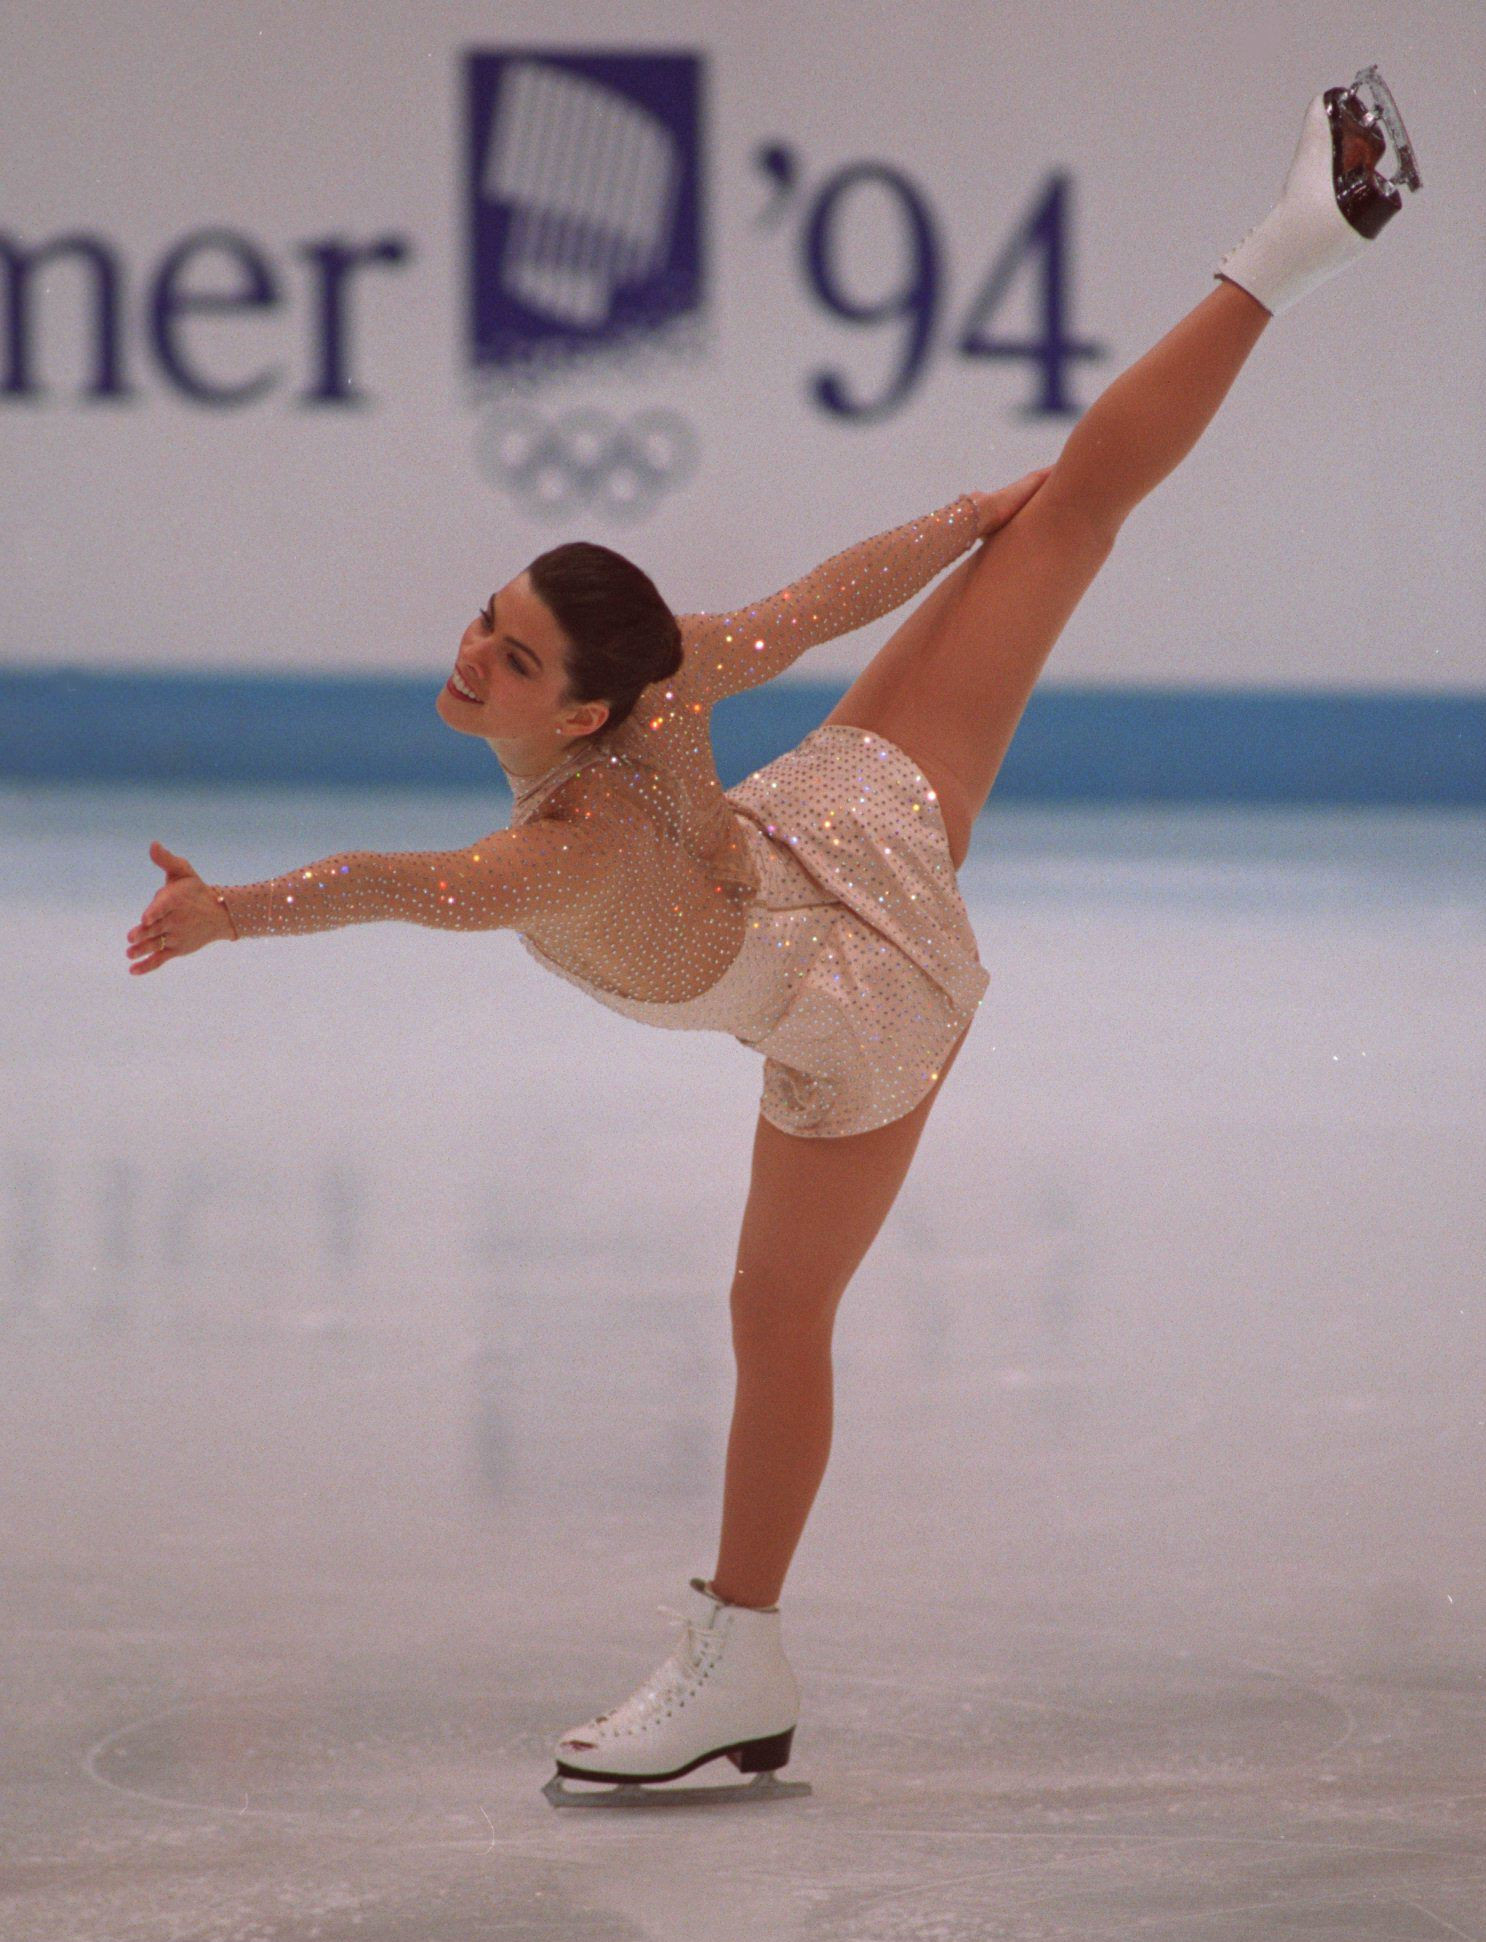 Nancy Kerrigan competed at the Lillehammer Games and won silver despite the attack ©Getty Images